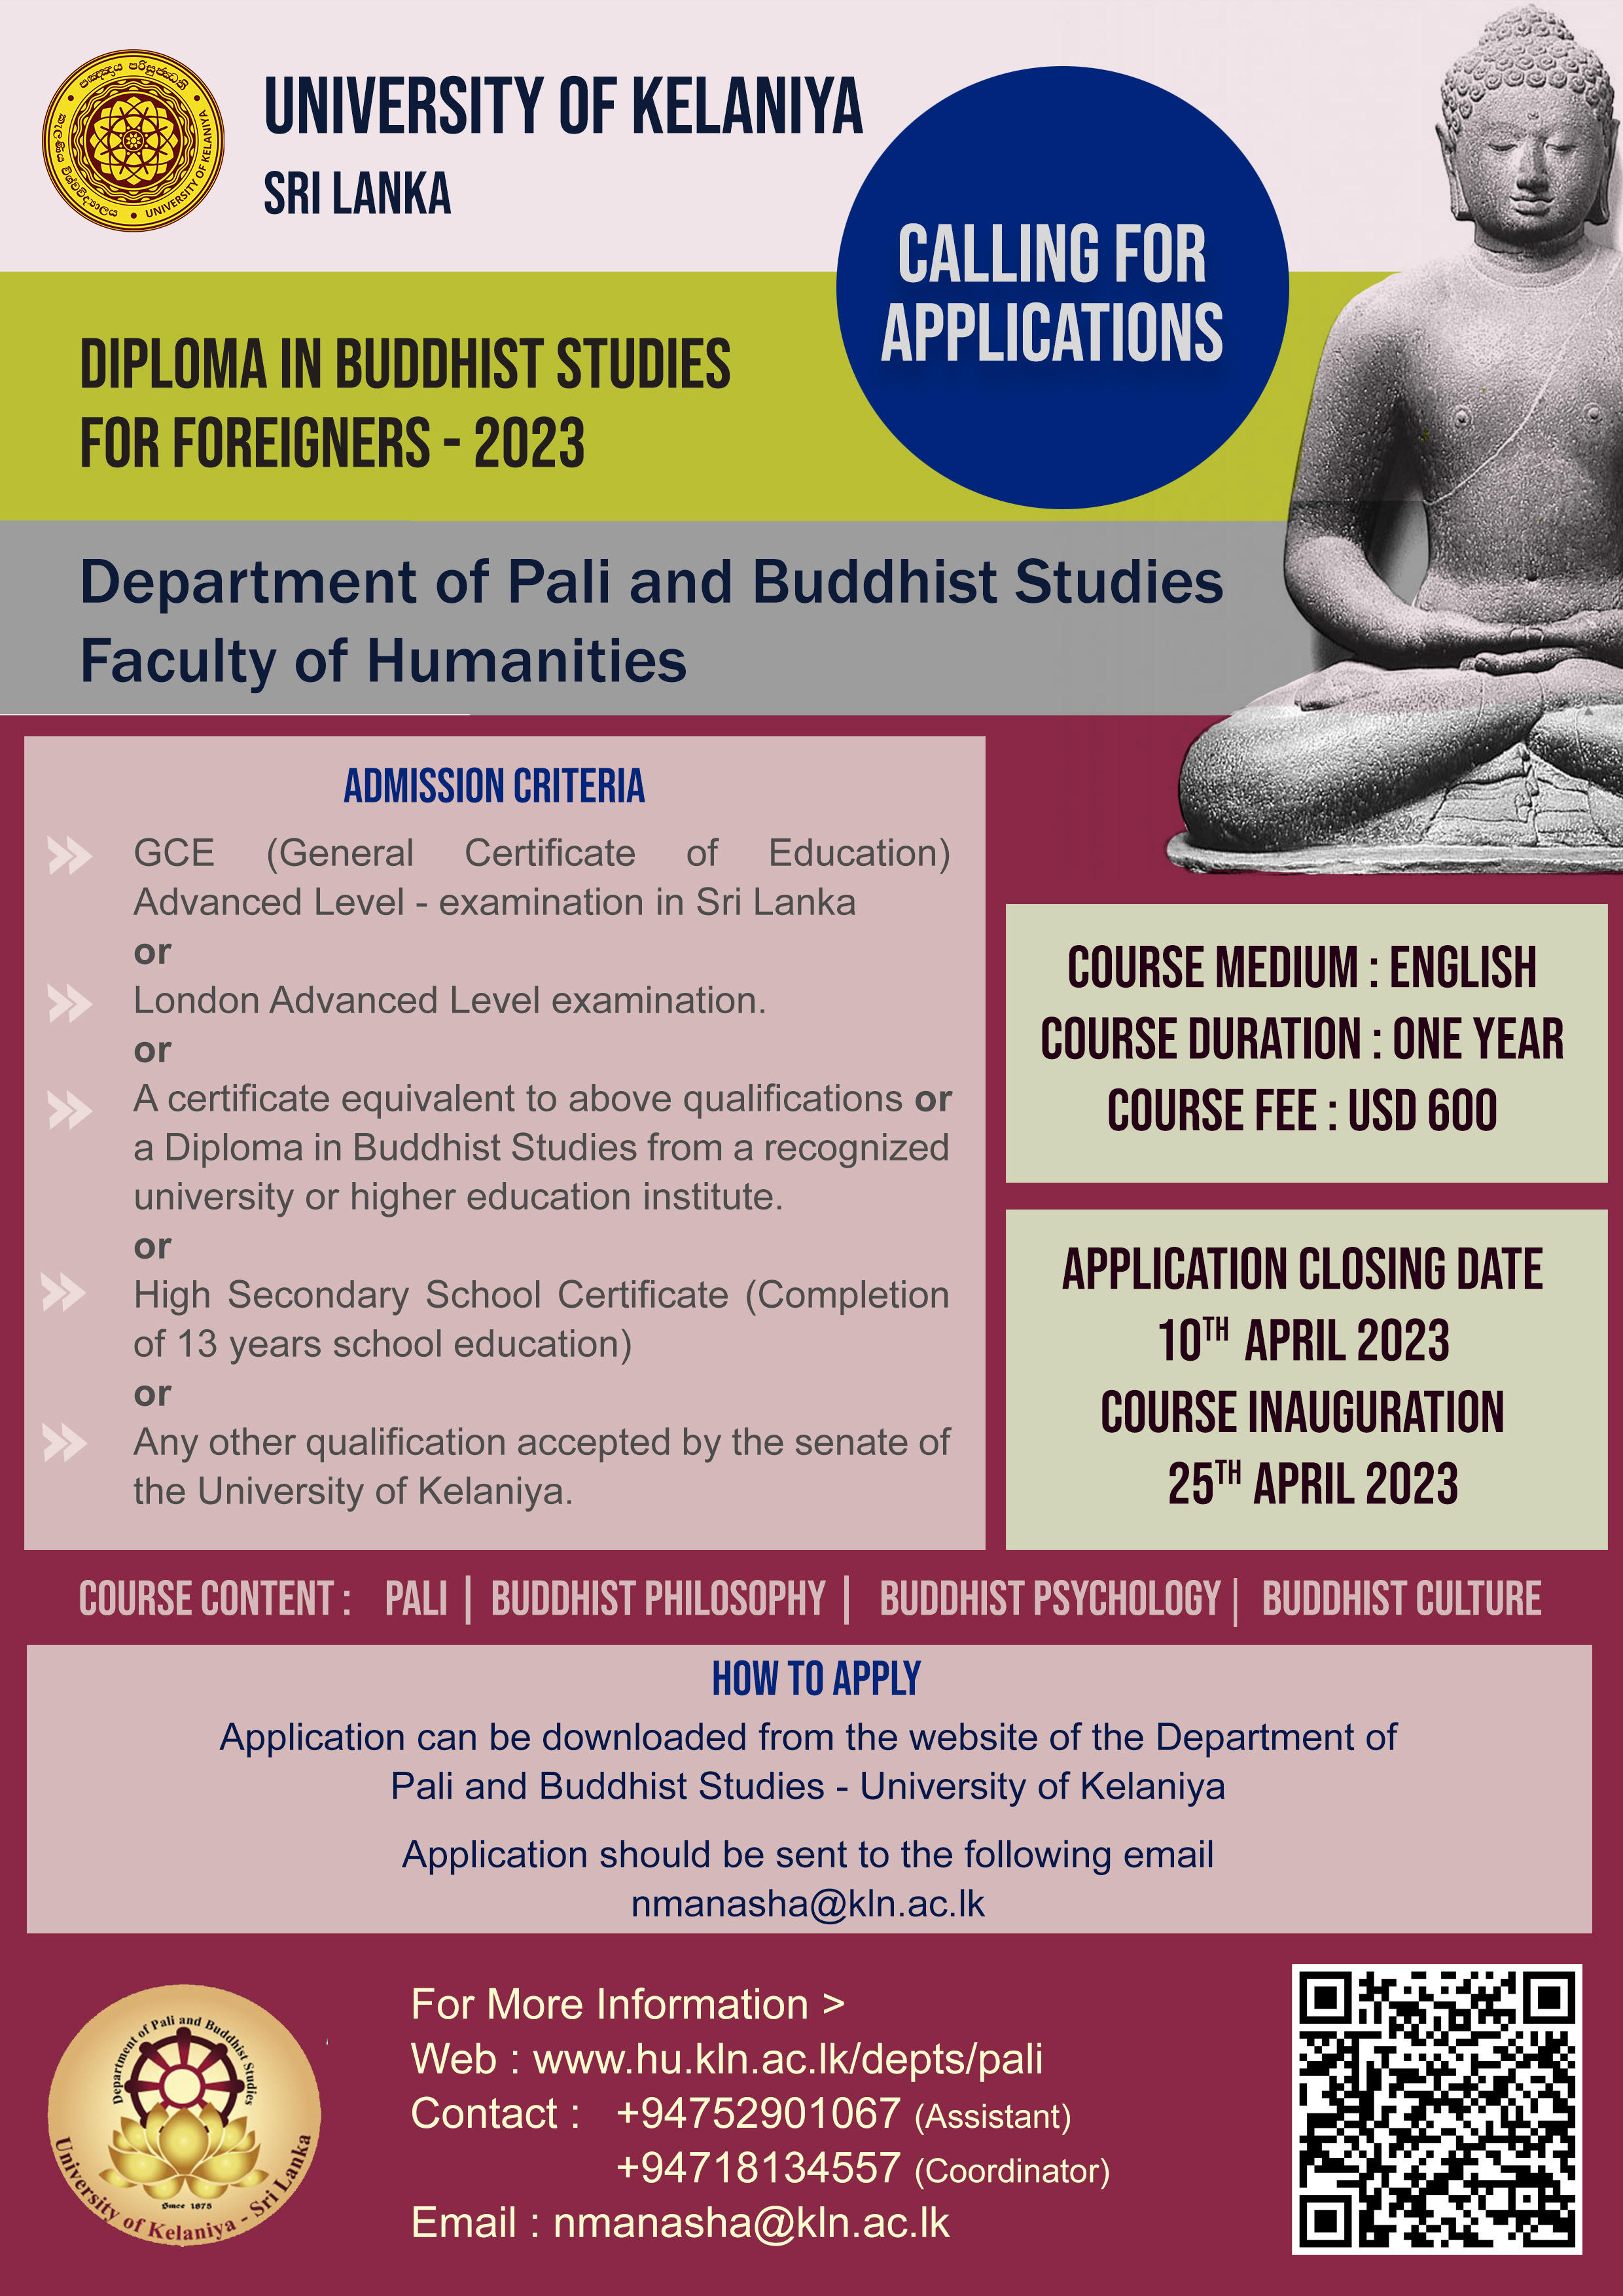 Diploma in Buddhist studies for foreigners 2023